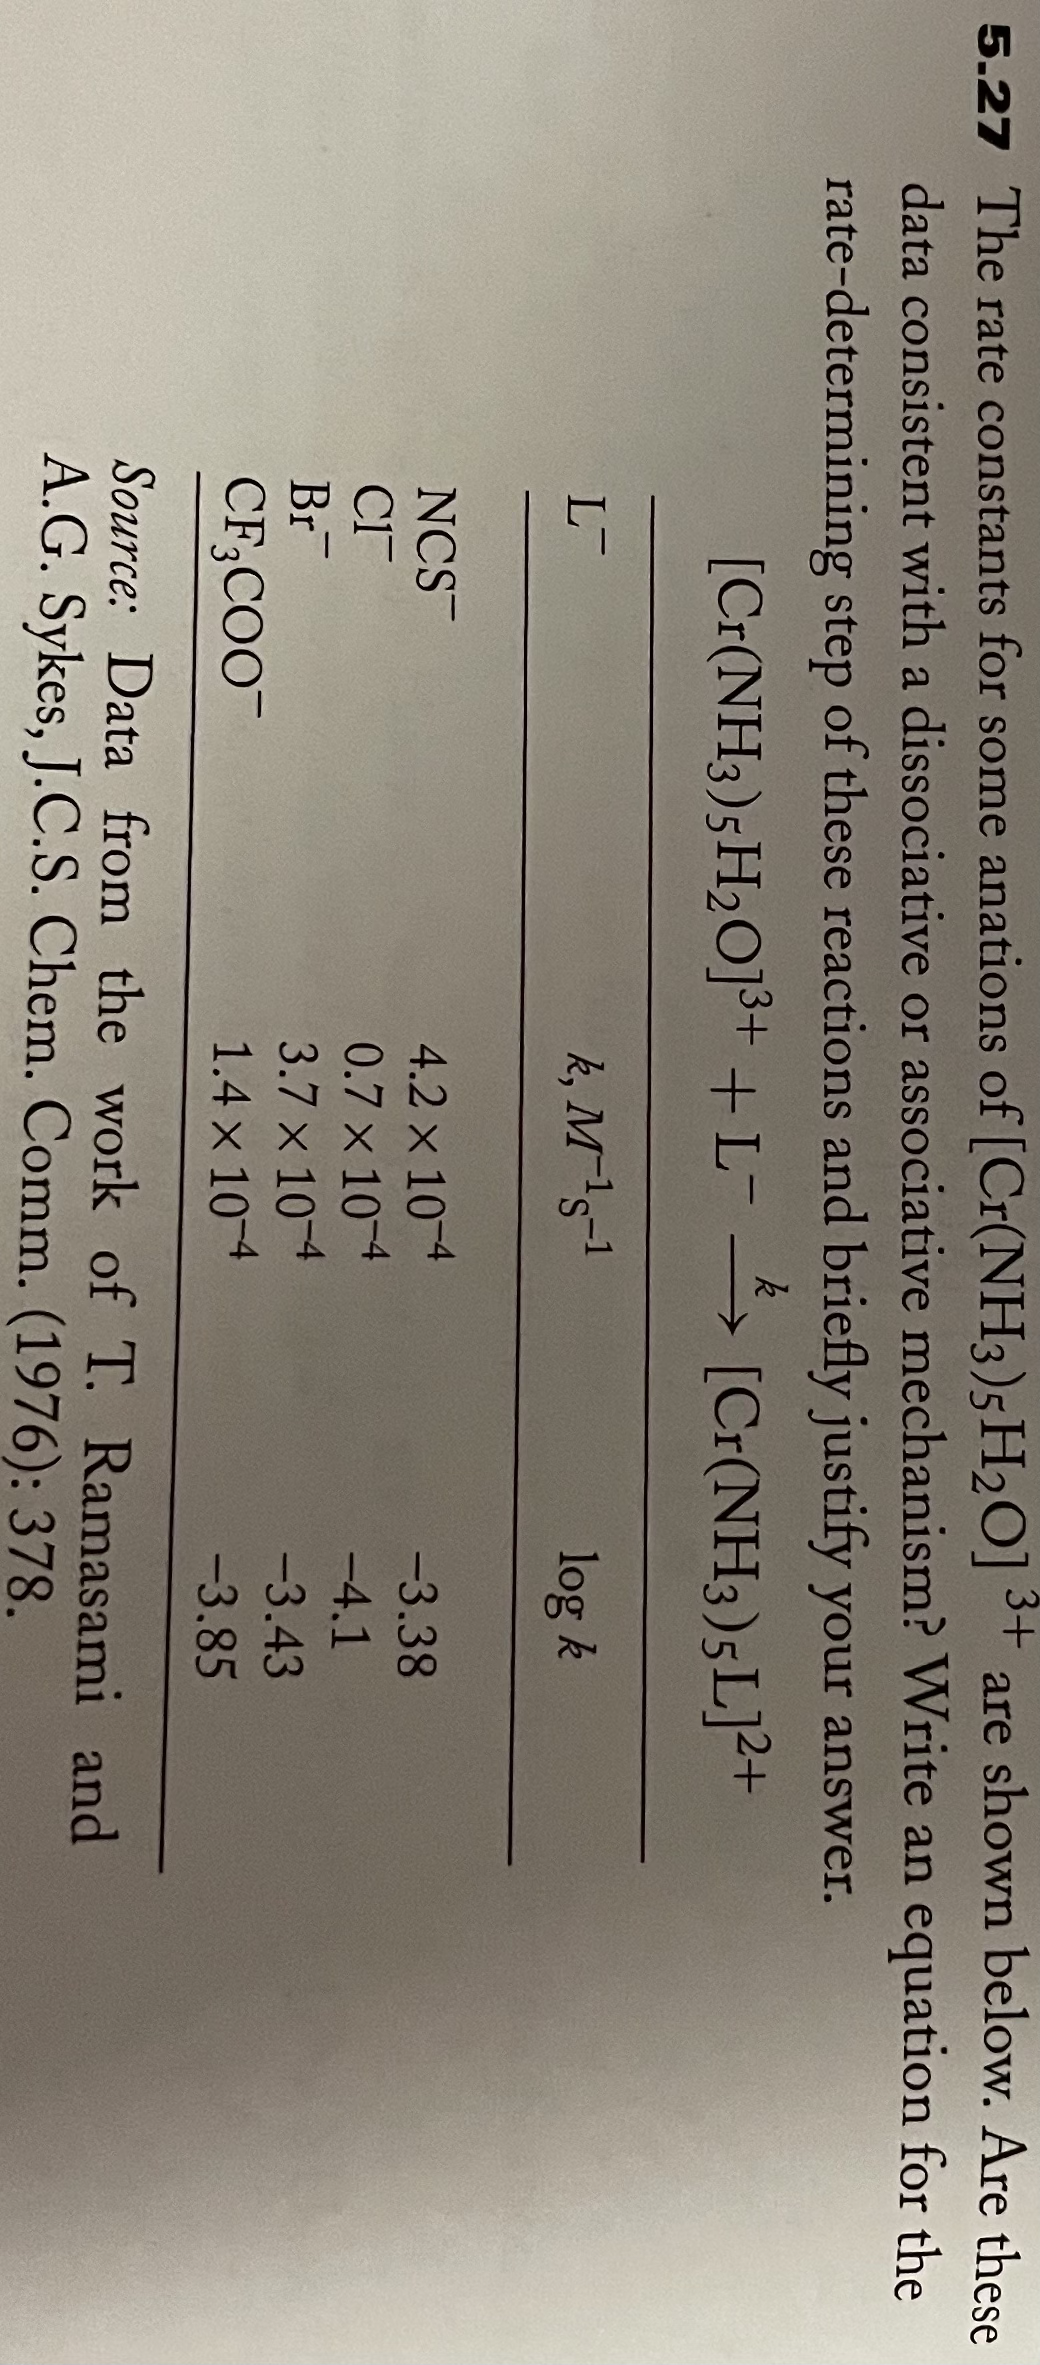 3+
are shown below. Are these
5.27 The rate constants for some anations of [Cr(NH3)5H2O]
data consistent with a dissociative or associative mechanism? Write an equation for the
rate-determining step of these reactions and briefly justify your answer.
k
[Cr(NH3)5H2O]3+ +L- > [Cr(NH3)5L]2+
L-
k, M's-1
log k
NCS
4.2 x 104
0.7 x 10-4
3.7 x 10-4
1.4 x 10-4
-3.38
CI
-4.1
Br
-3.43
CF;COO
-3.85
Source: Data from the work of T. Ramasami and
A.G. Sykes, J.C.S. Chem. Comm. (1976): 378.
